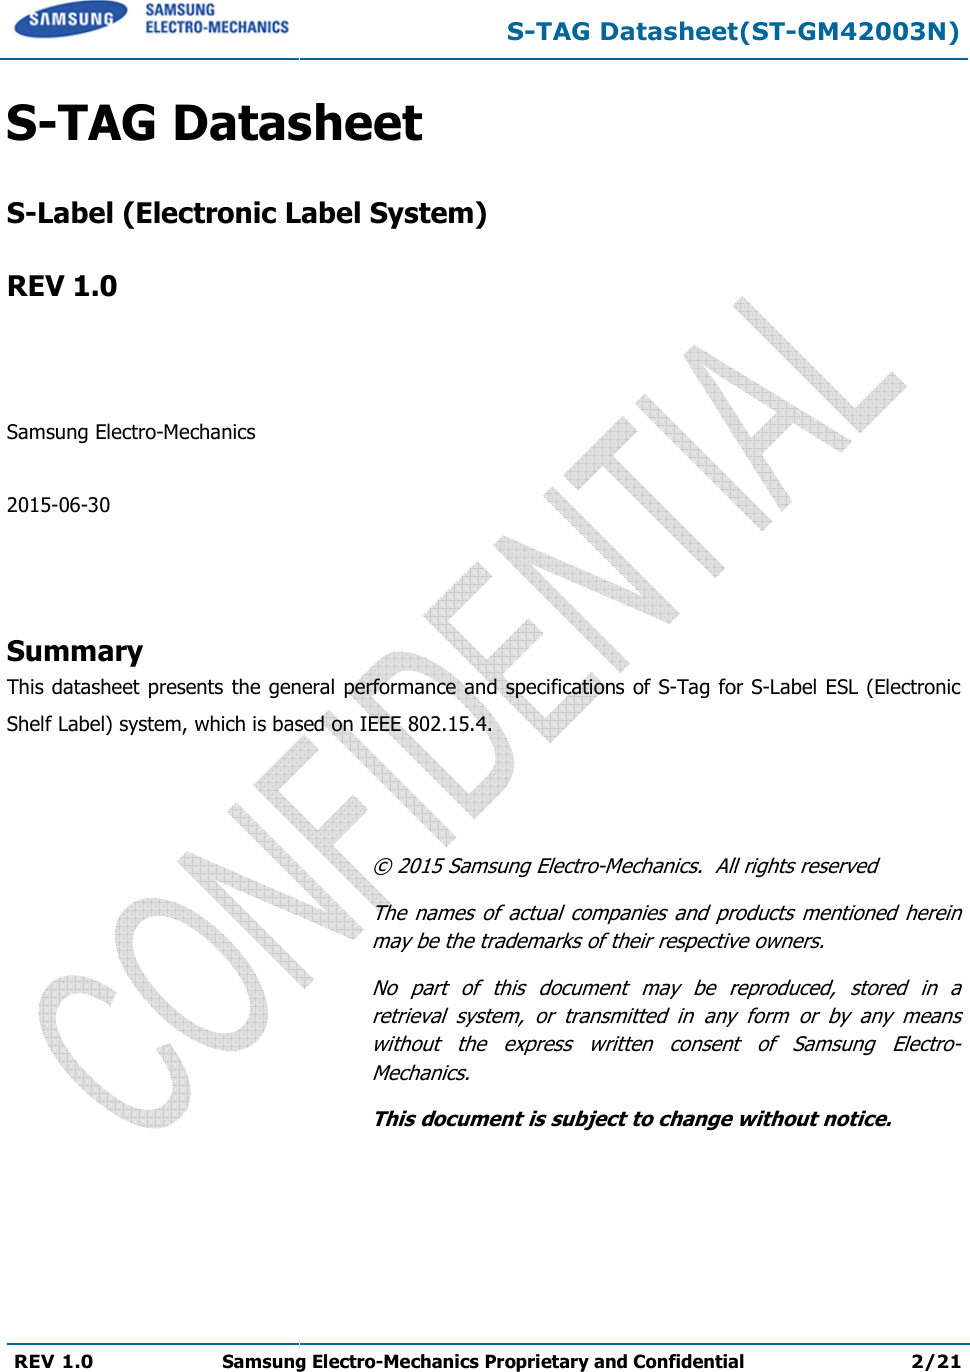   REV 1.0 Samsung Electro  S-TAG Datasheet S-Label (Electronic Label System) REV 1.0    Samsung Electro-Mechanics  2015-06-30    Summary This datasheet presents the general performance and specificationShelf Label) system, which is based on     S-TAG Datasheet(STSamsung Electro-Mechanics Proprietary and ConfidentialDatasheet  Label (Electronic Label System) general performance and specifications of S-Tag for based on IEEE 802.15.4. © 2015 Samsung Electro-Mechanics.  All rights reservedThe names  of  actual  companies  and products  mentioned  herein may be the trademarks of their respective ownNo  part  of  this  document  may  be  reproduced,  stored  in  a retrieval  system,  or  transmitted  in  any  form  or  by  any  means without  the  express  written  consent  of  Samsung  ElectroMechanics. This document is subject to change without notice.TAG Datasheet(ST-GM42003N) Proprietary and Confidential 2/21 for S-Label ESL (Electronic Mechanics.  All rights reserved The names  of  actual  companies  and  products  mentioned  herein may be the trademarks of their respective owners. No  part  of  this  document  may  be  reproduced,  stored  in  a retrieval  system,  or  transmitted  in  any  form  or  by  any  means without  the  express  written  consent  of  Samsung  Electro-This document is subject to change without notice. 